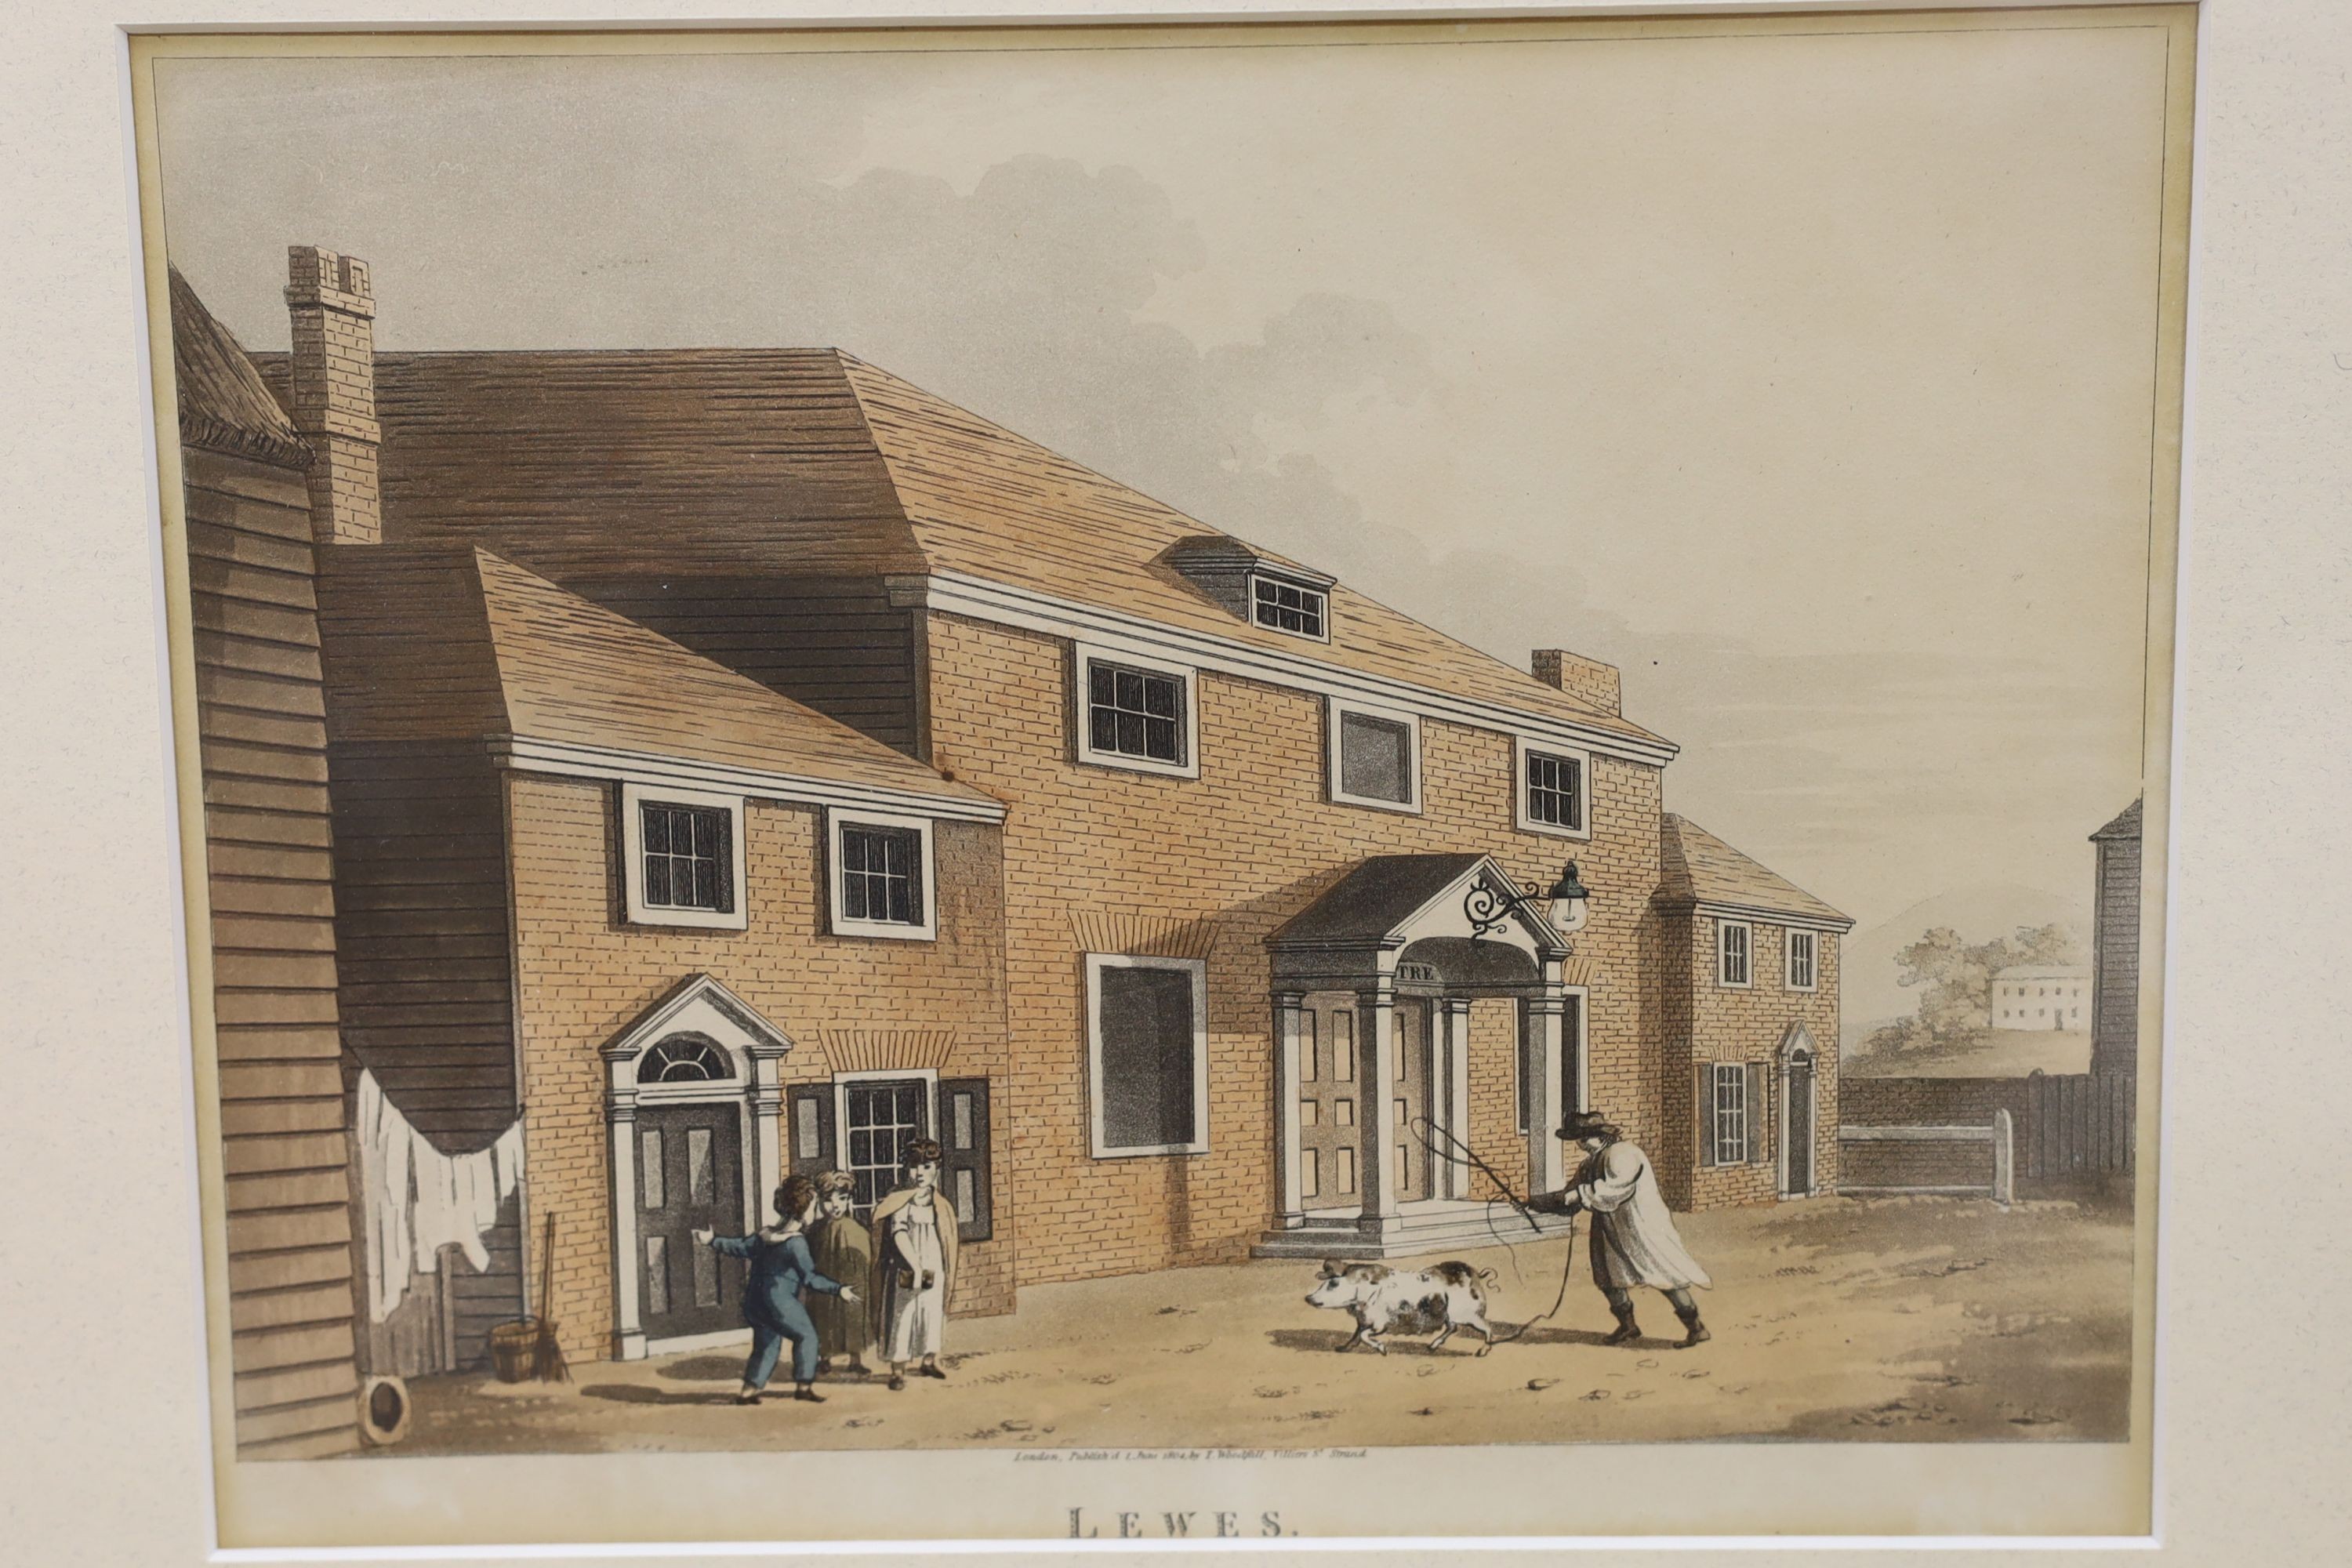 H.J. Gibbins (fl.1871-2), watercolour, 'Lewes', signed, 22 x 31cm, with two engravings of Lewes and a small print of The Pavilion at Brighton